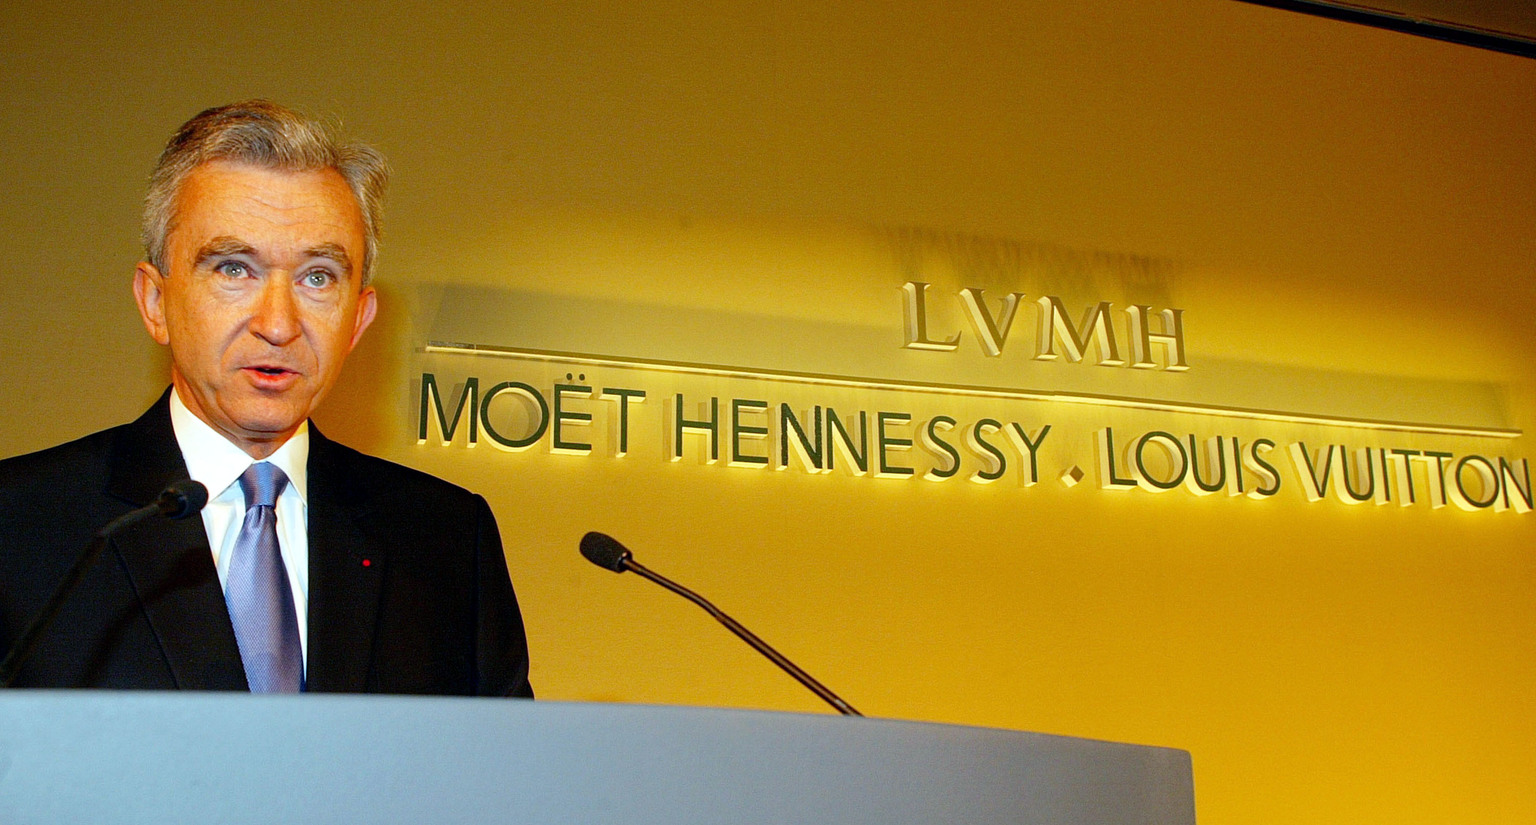 Louis Vuitton Moët Hennessy Company Analysis